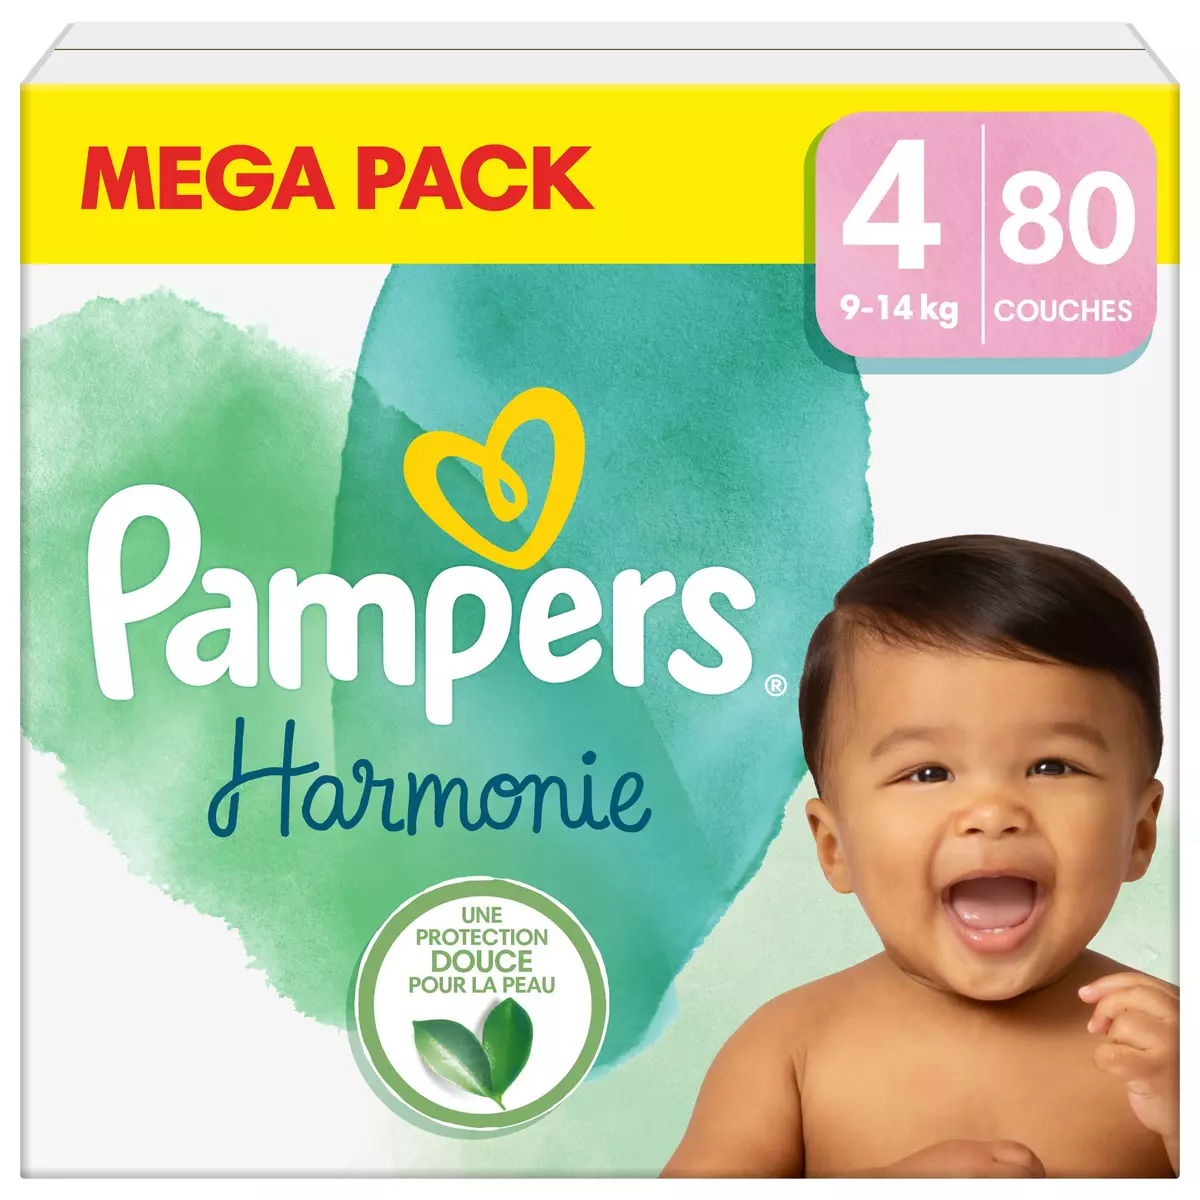 PAMPERS Harmonie couches taille 4 (9-14kg) 80 couches